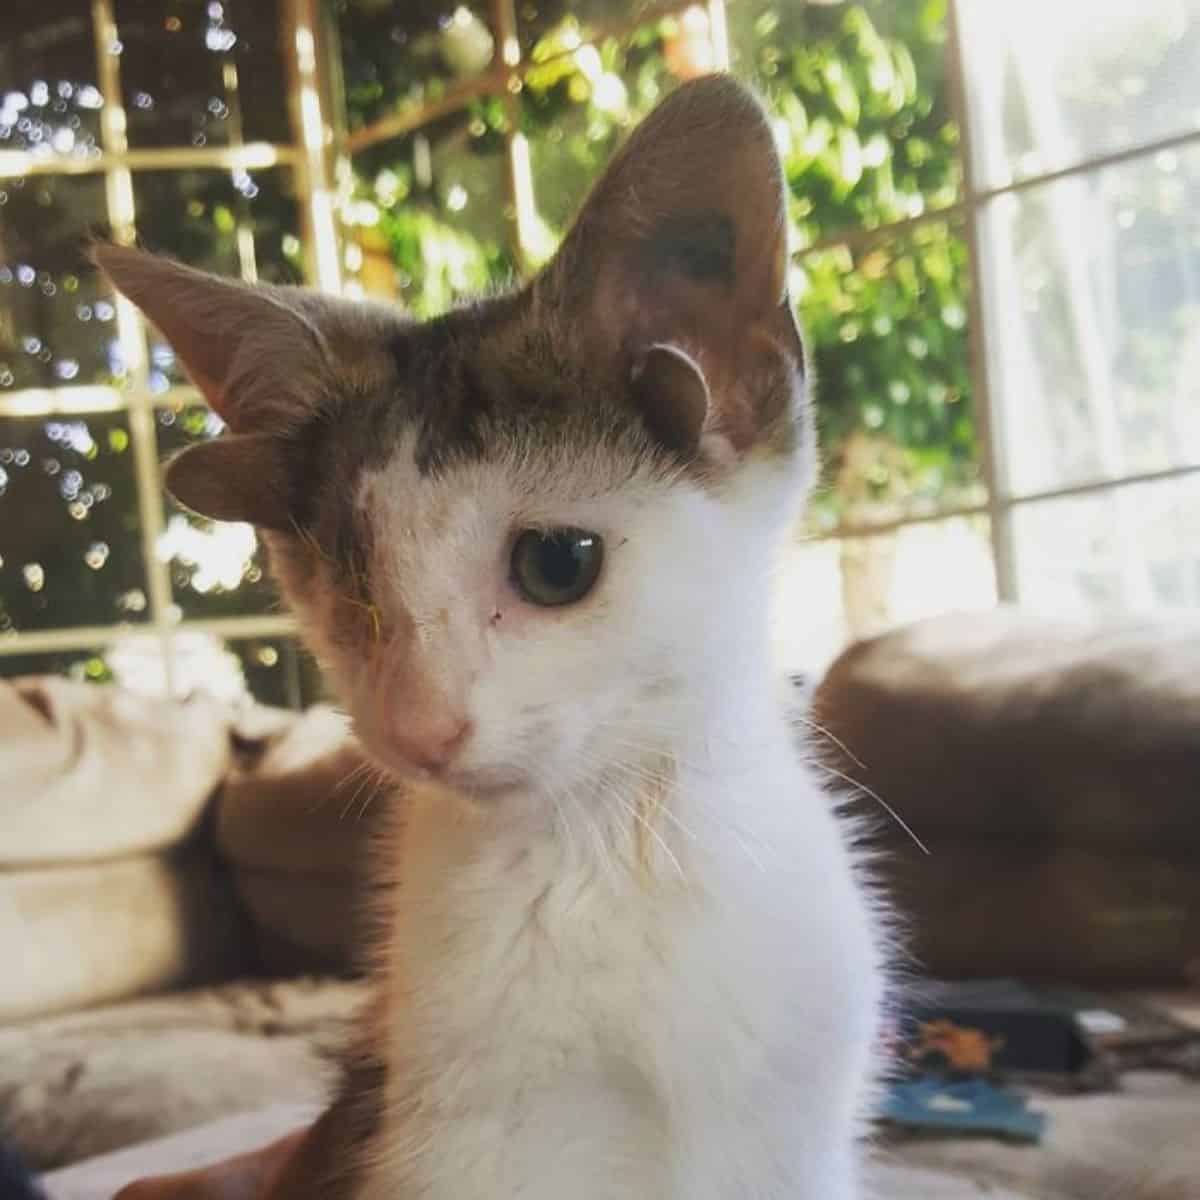 a cat with four ears and without one eye sits with a downcast gaze